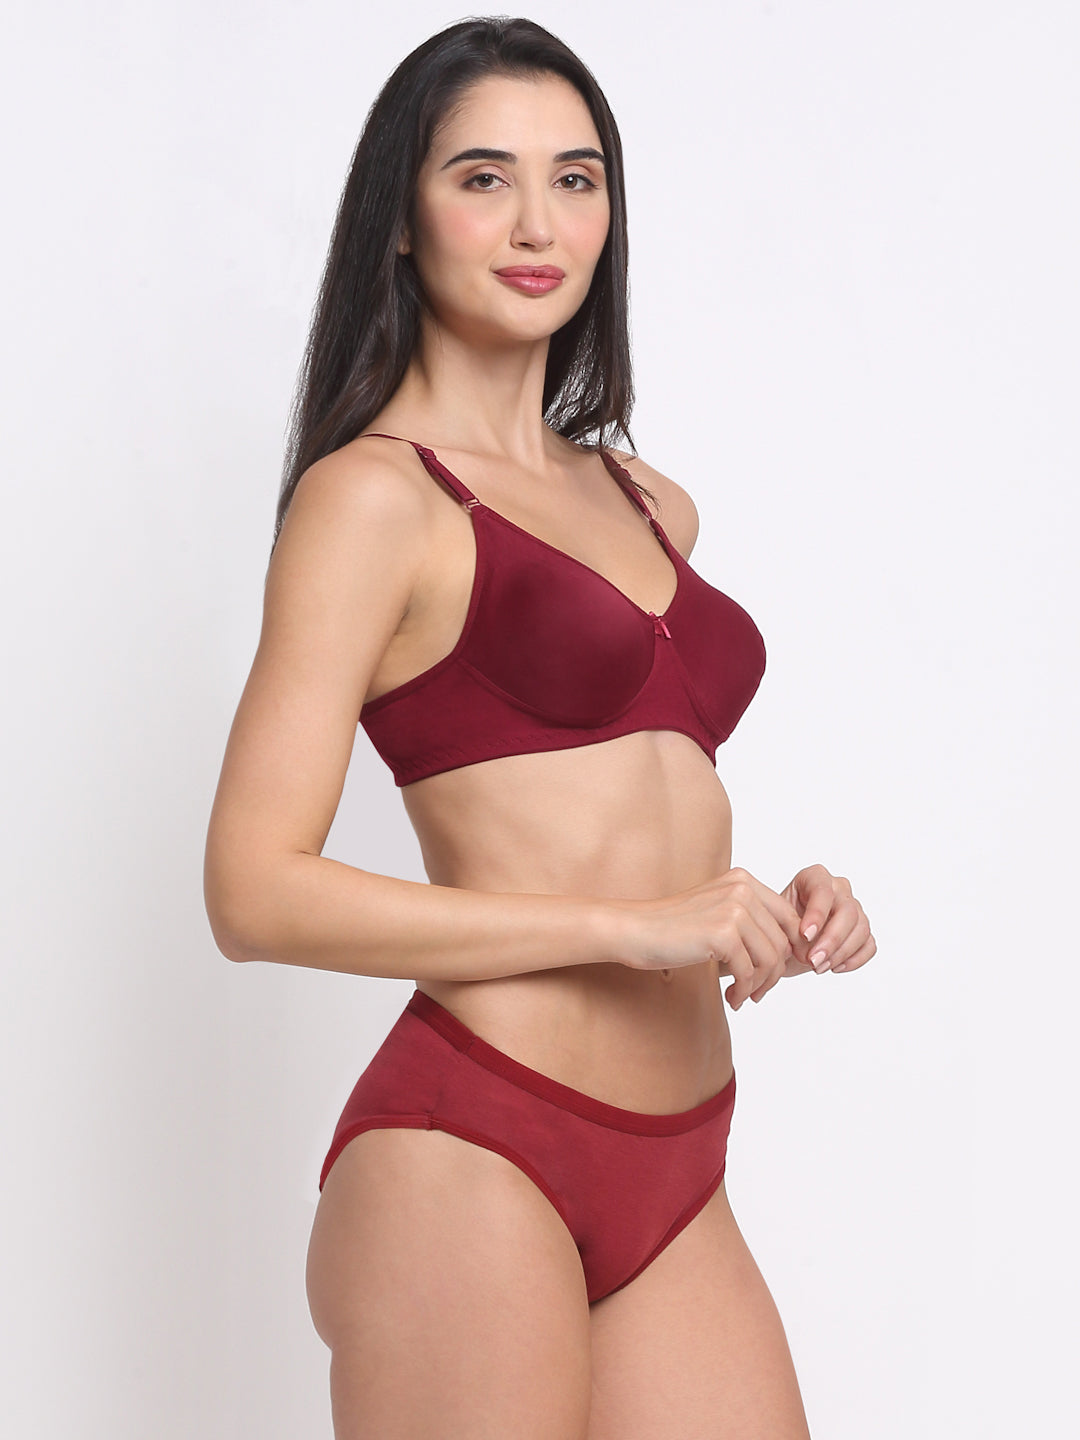 Bra and Panty Set - Red